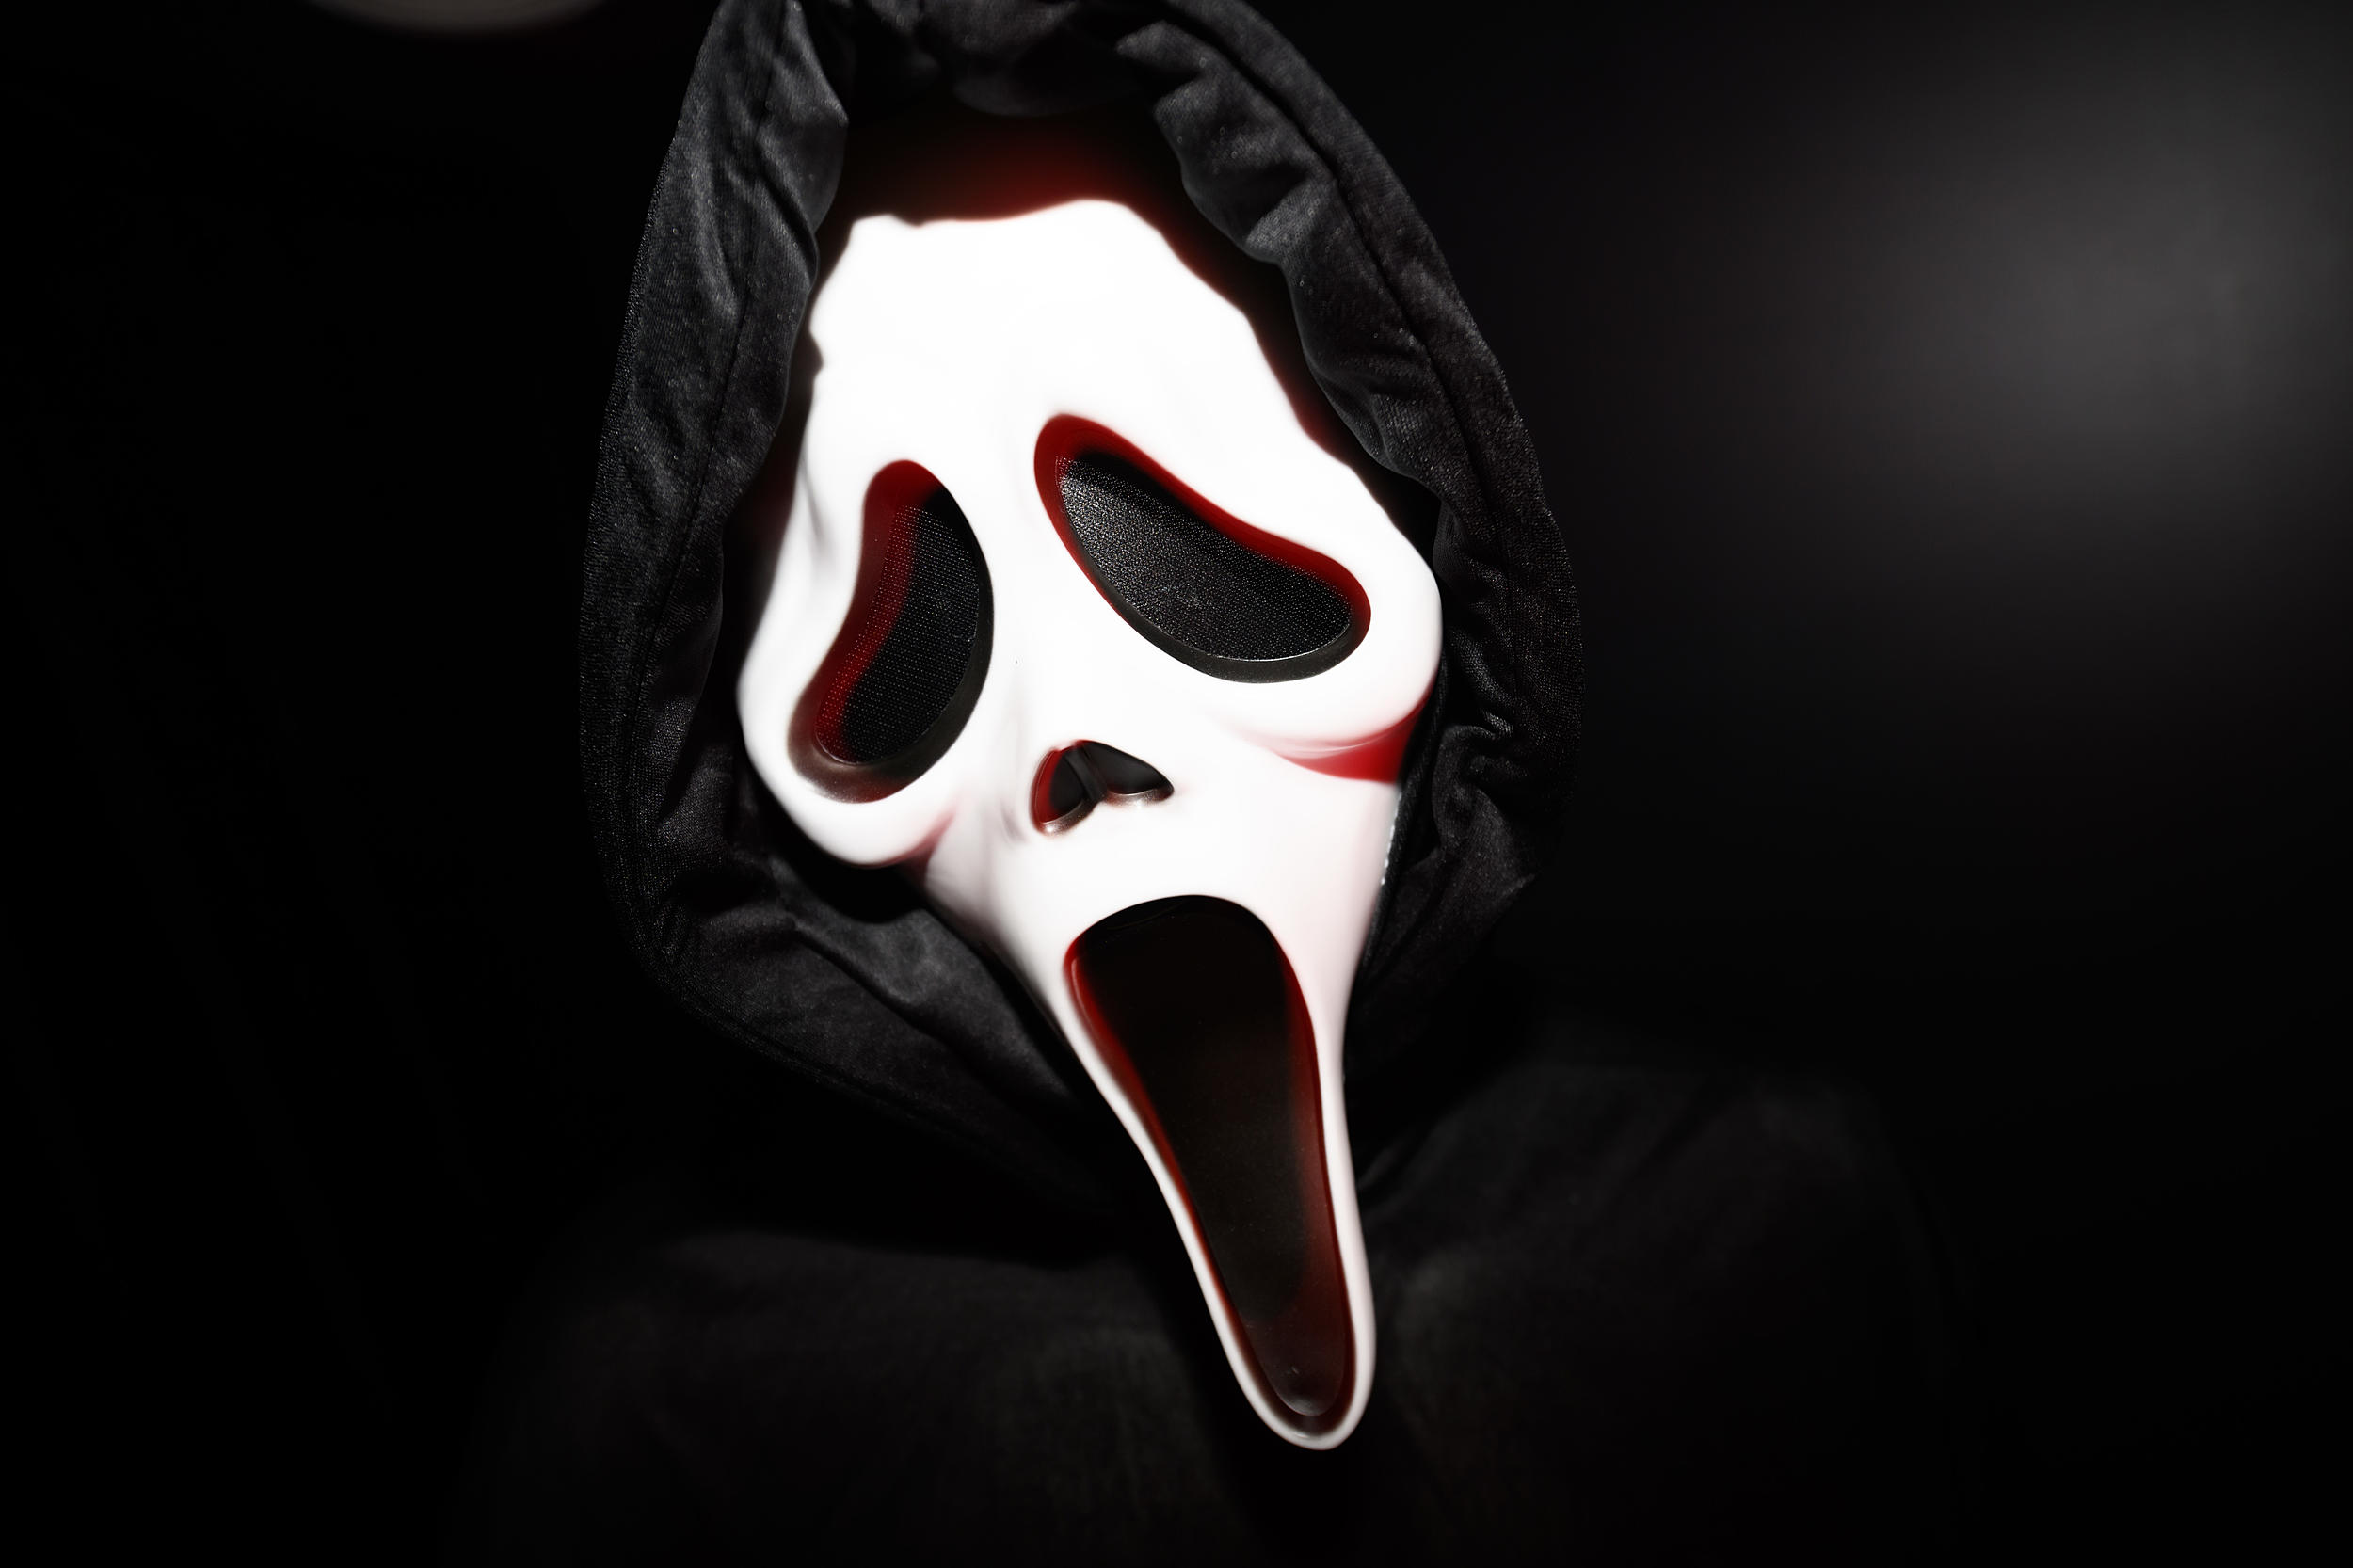 Creep out your fellow New Jerseyans with this 'Scream' prank call